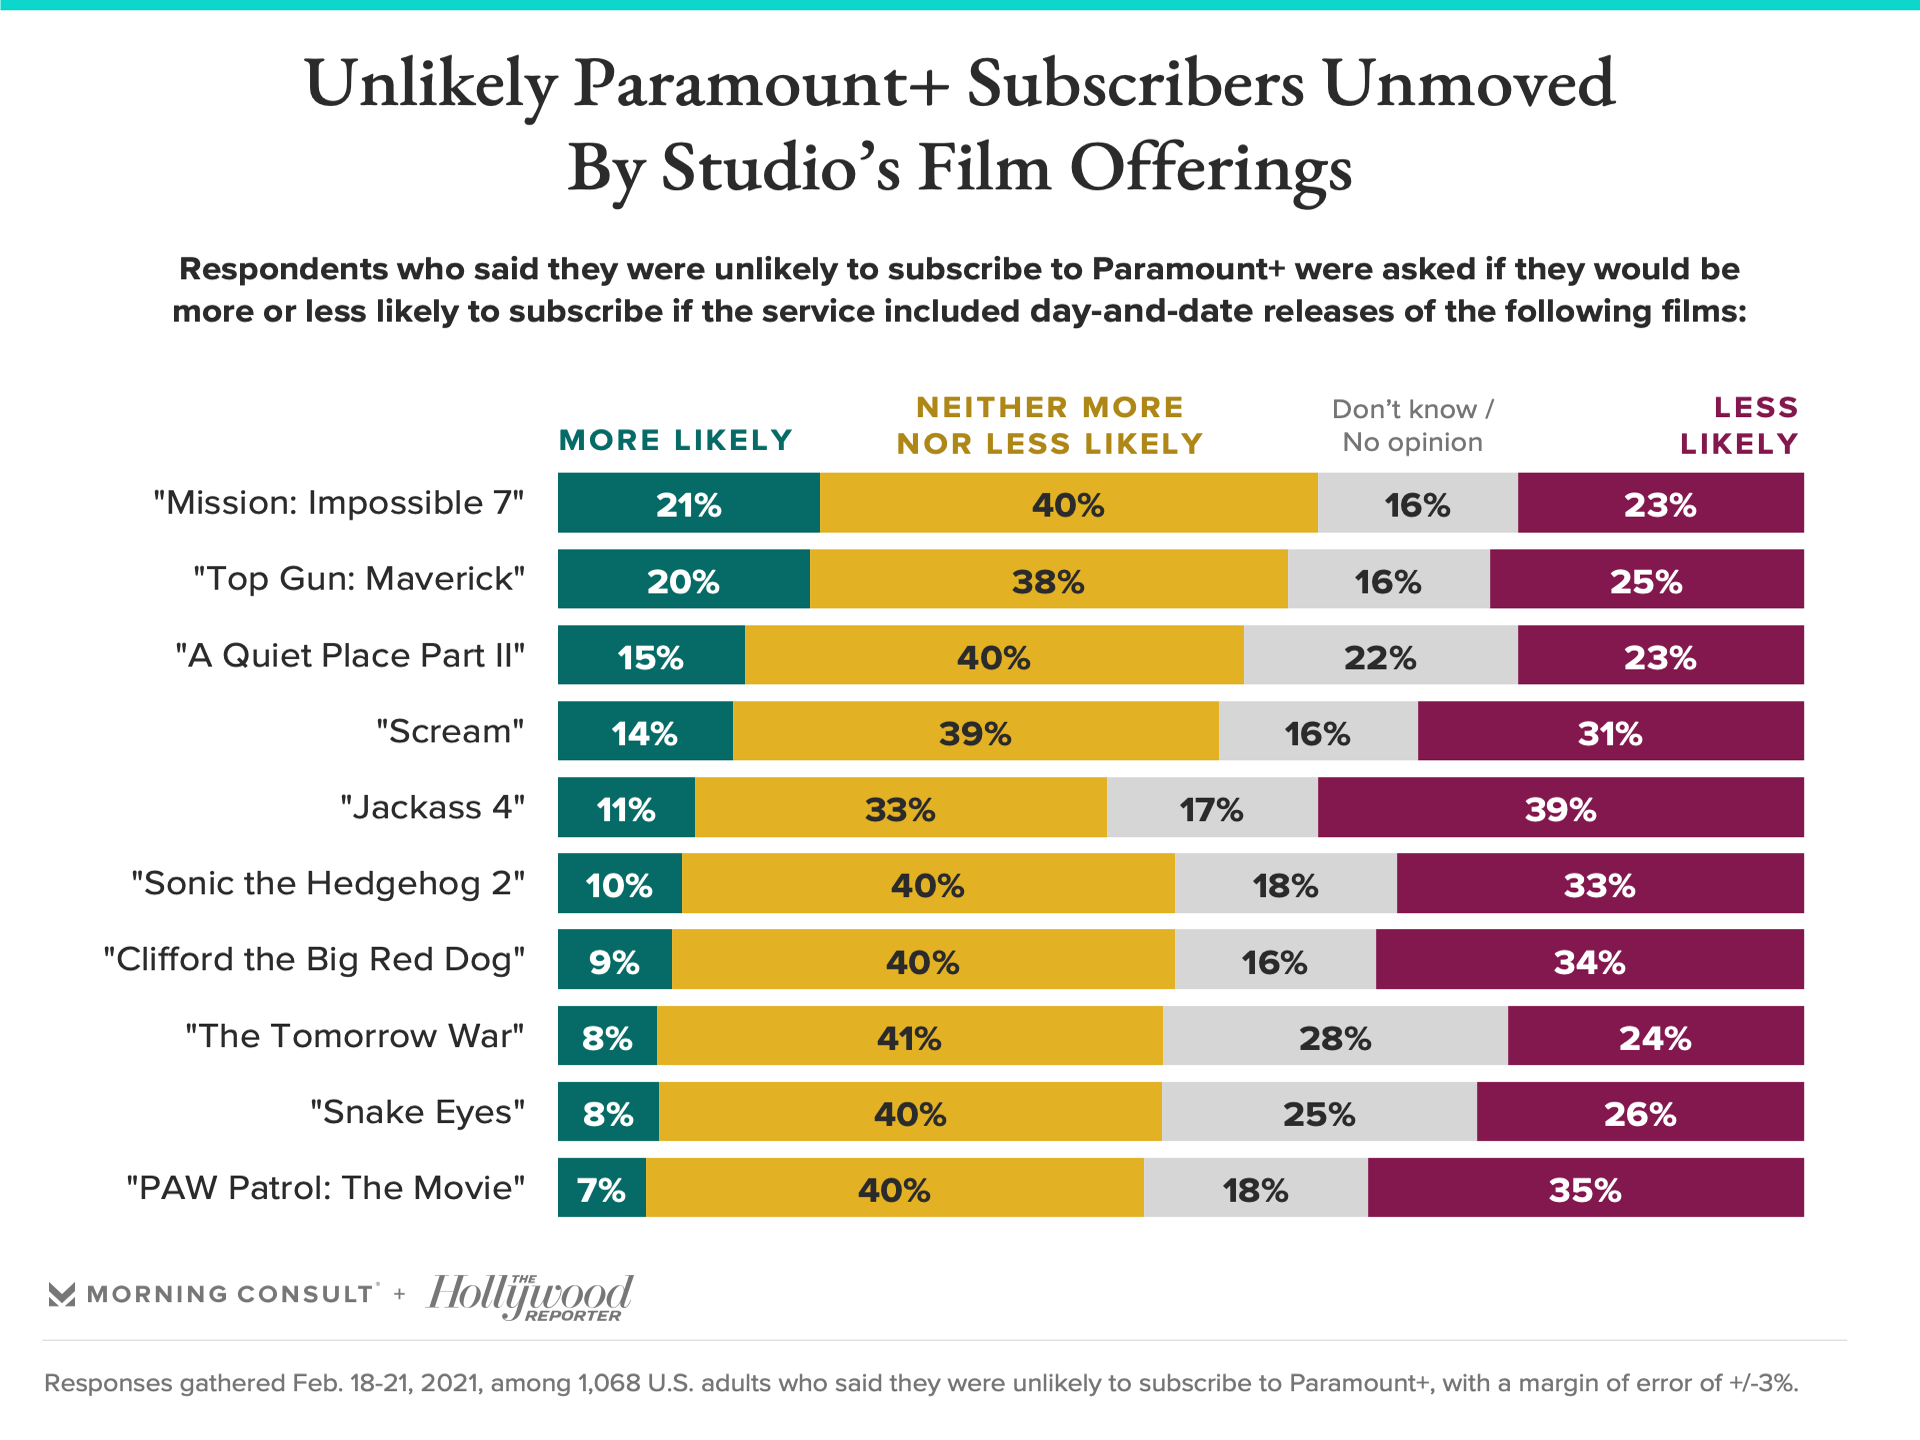 Paramount+ Is Entering a Crowded Streaming Market. What Will Make